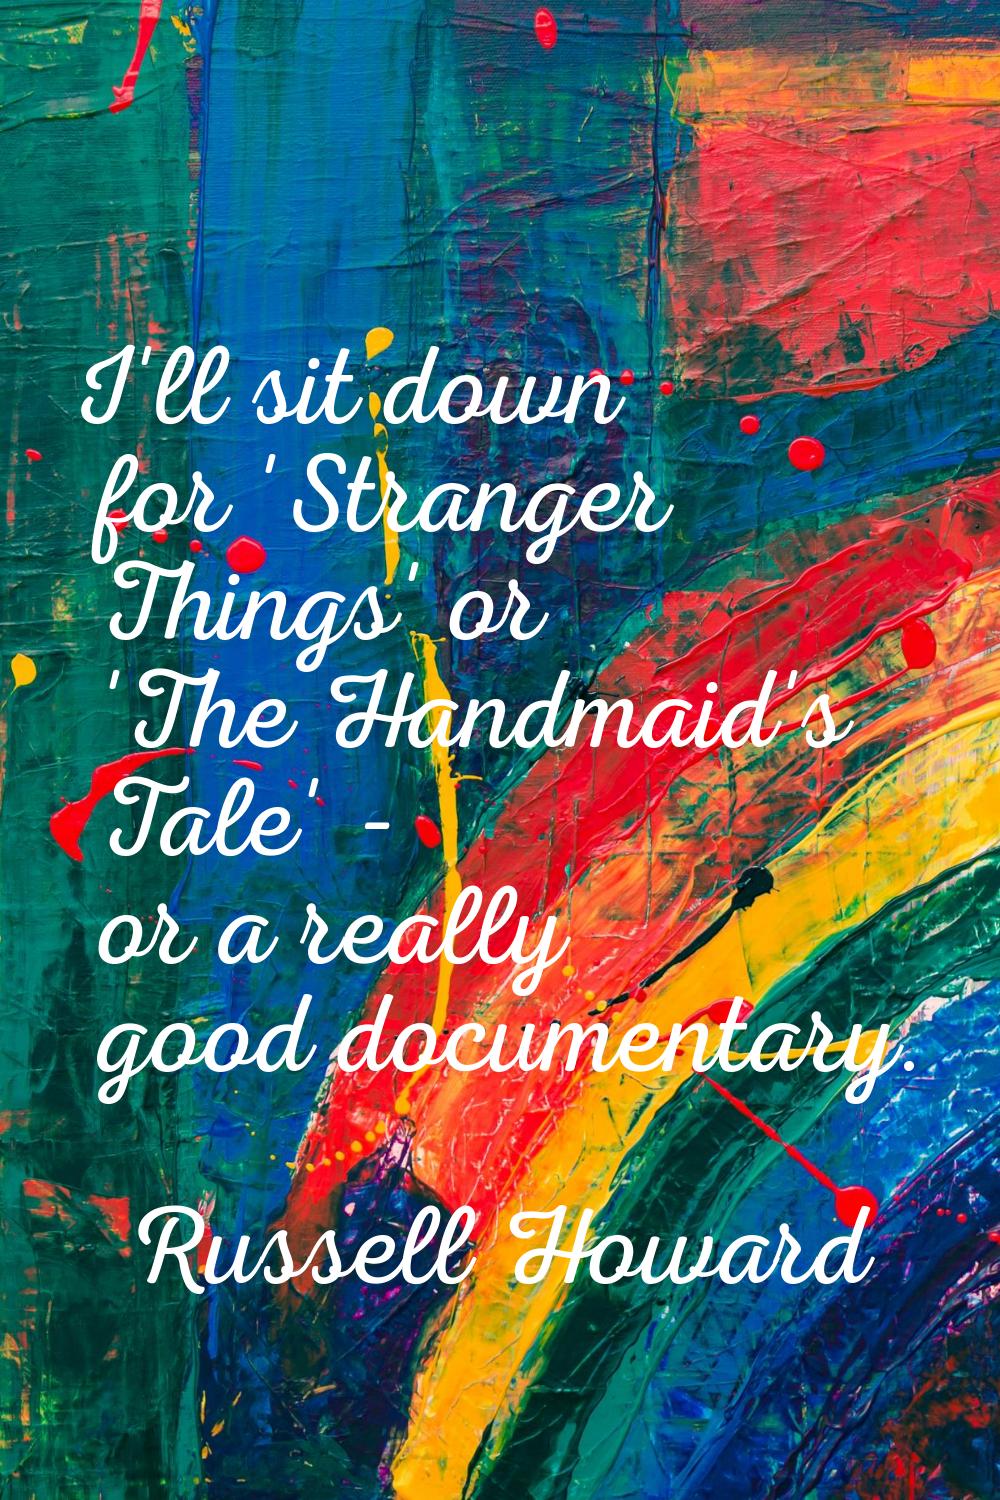 I'll sit down for 'Stranger Things' or 'The Handmaid's Tale' - or a really good documentary.